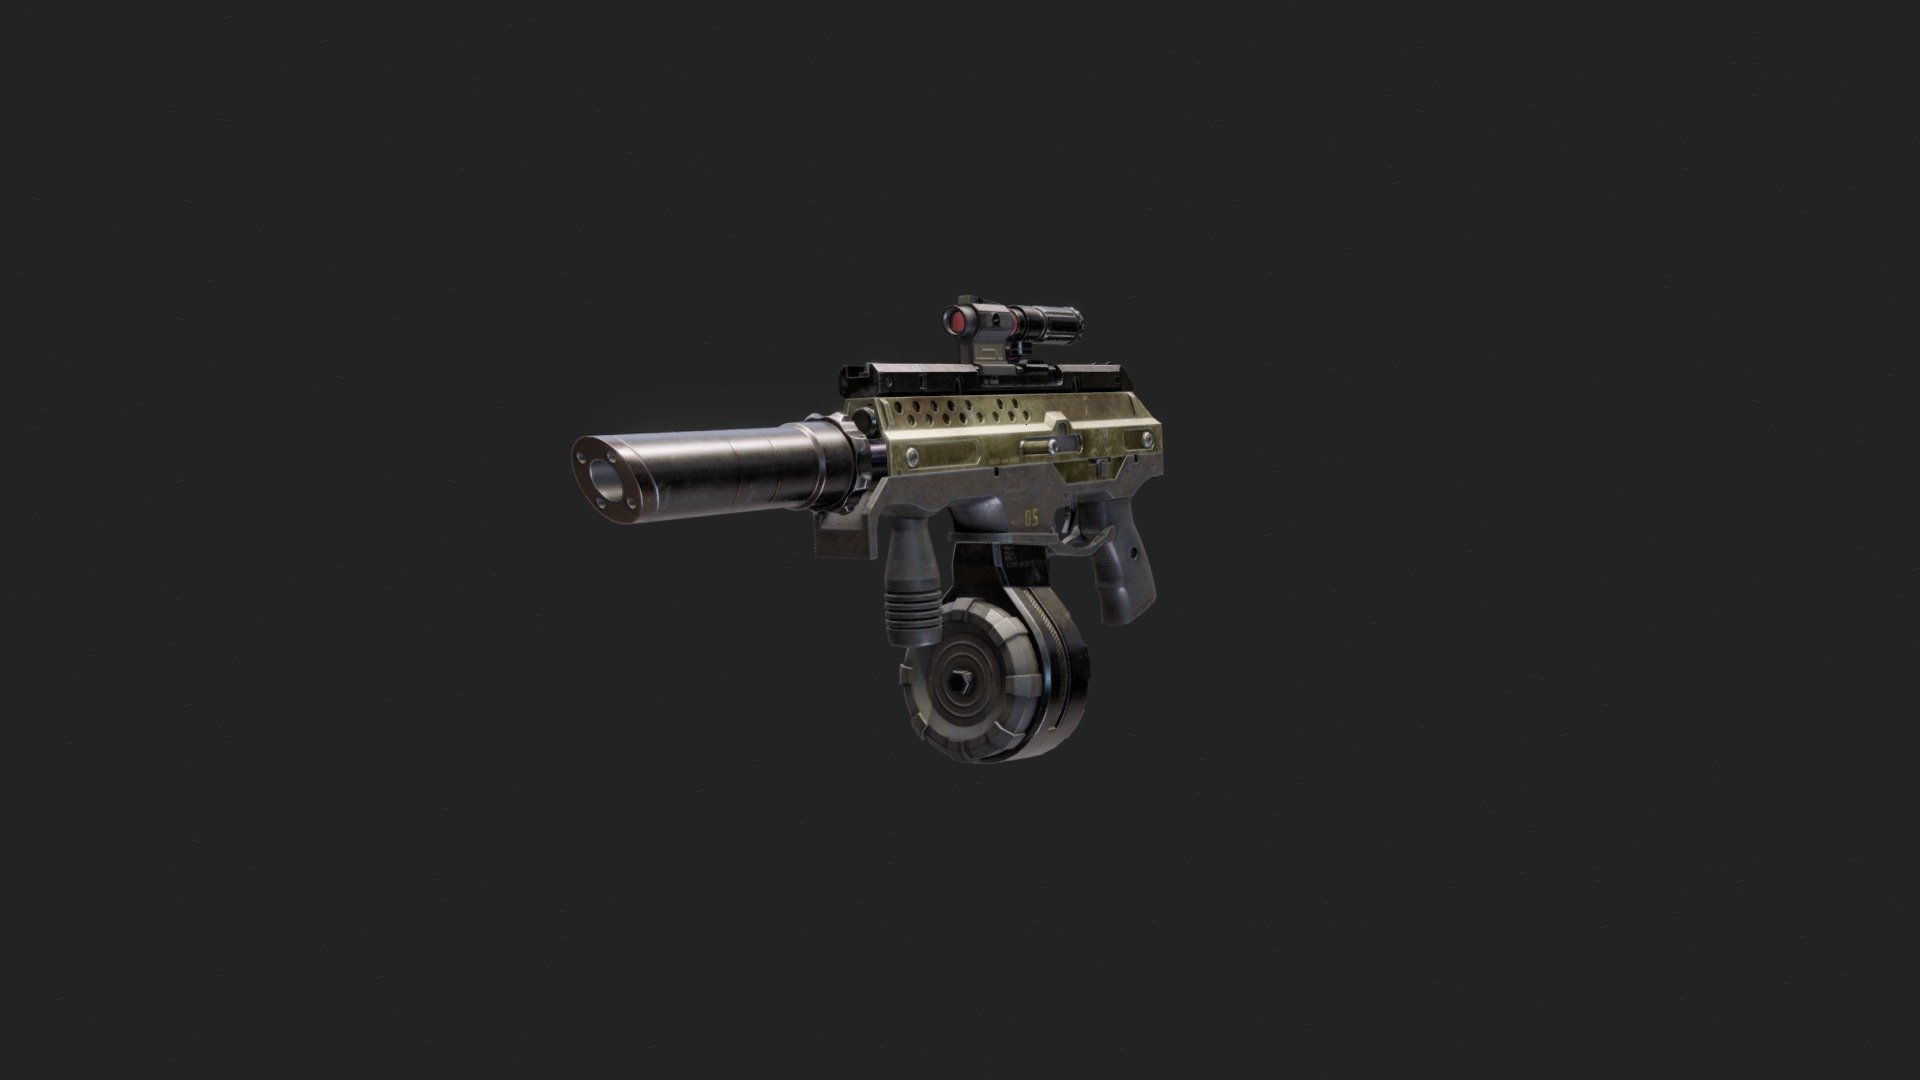 SMG model created with the concept of a breathtaking Kris Thaler (https://www.artstation.com/kristhaler). Decided to recreate textures and attachments with my own style. 
2x4k texture sets - 10mm Submachine gun - 3D model by Epsilon_411 (@Epsilon411) 3d model